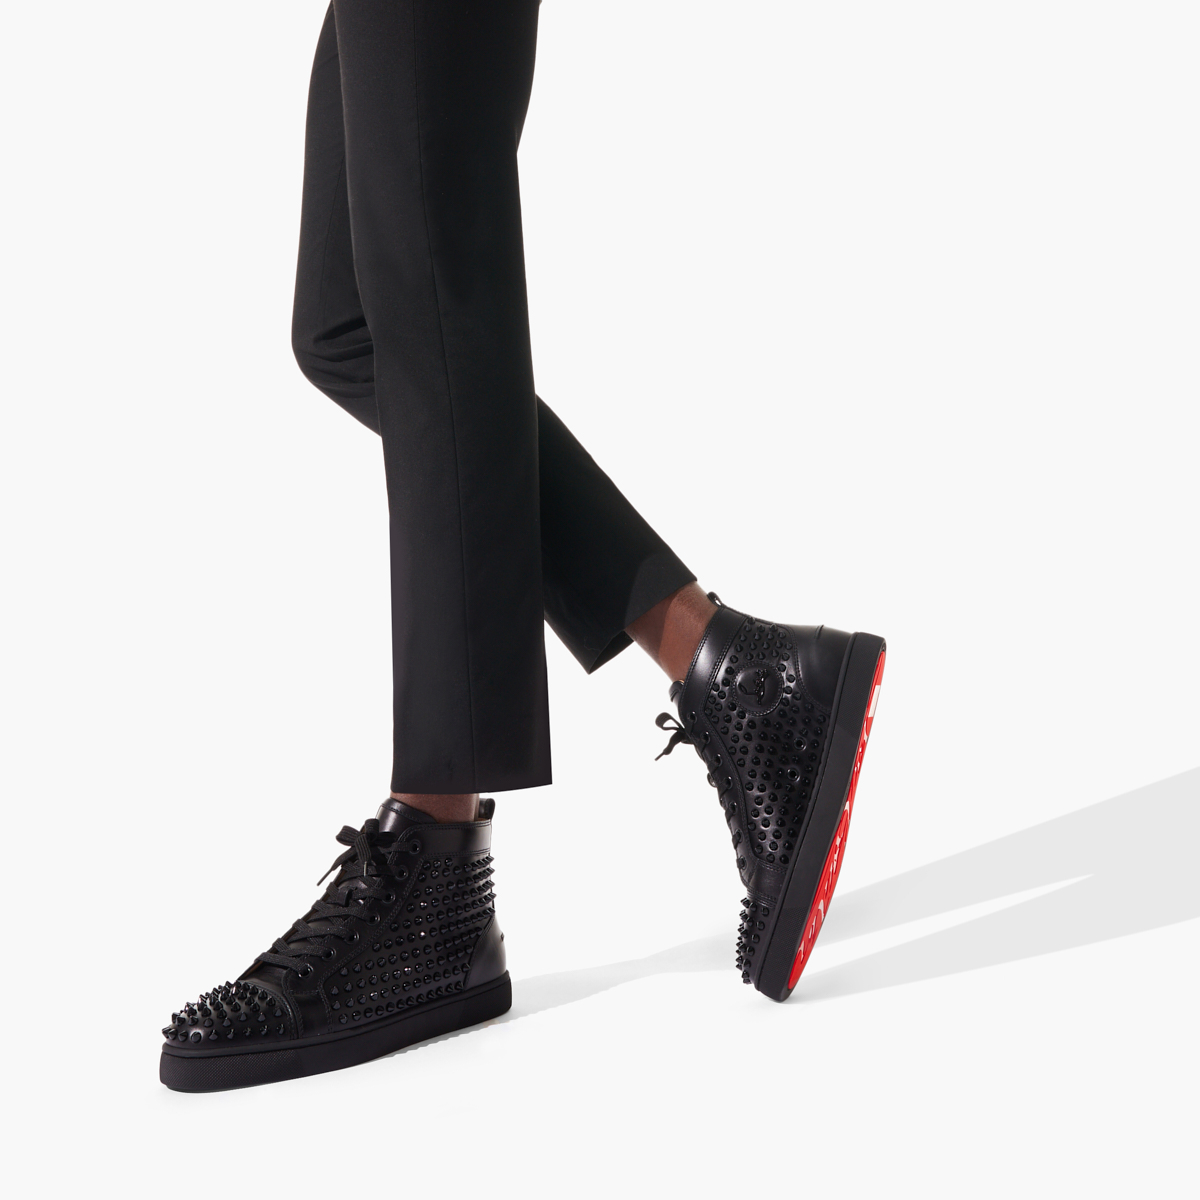 Lou Spikes - High-top sneakers - Suede - Black - Christian Louboutin